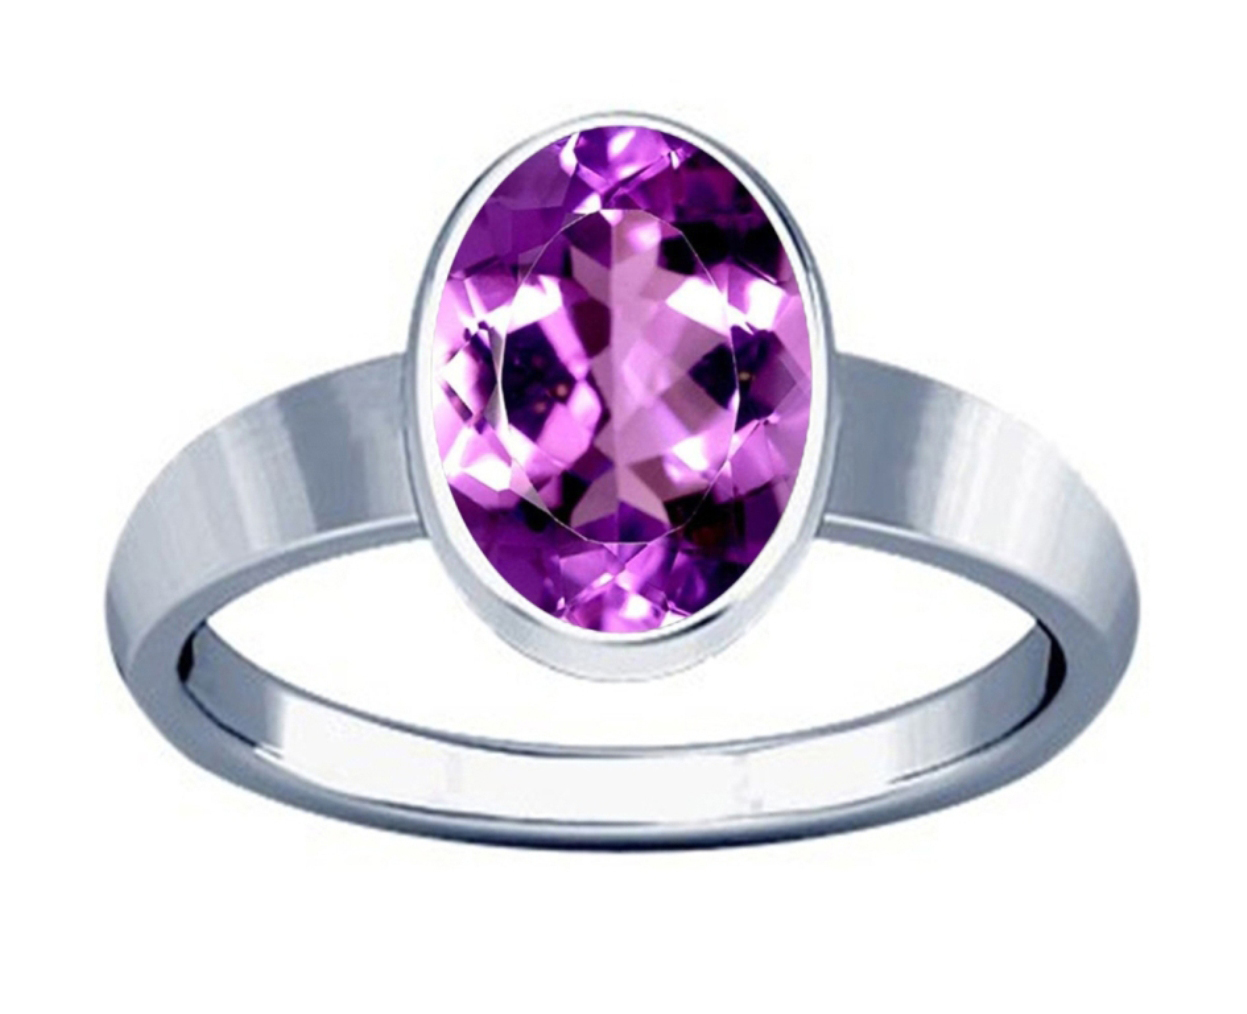 Created Opal & Genuine Amethyst Ring, Silver......................NOW